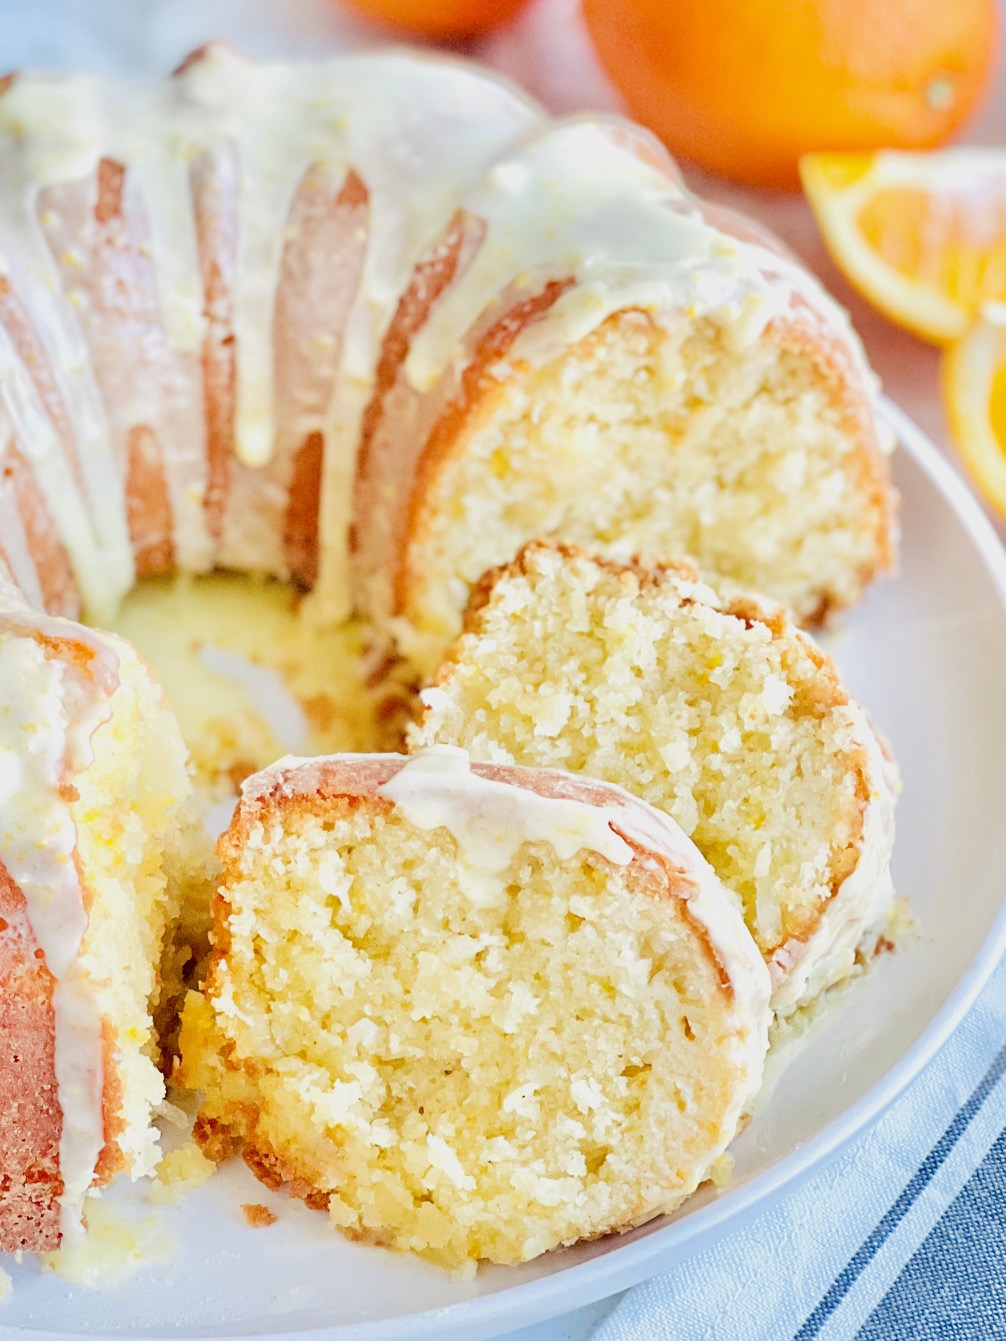 A circle shaped bundt cake with shredded coconut and fresh orange zest cut into slices. There is a light colored glaze over the top of the cake.